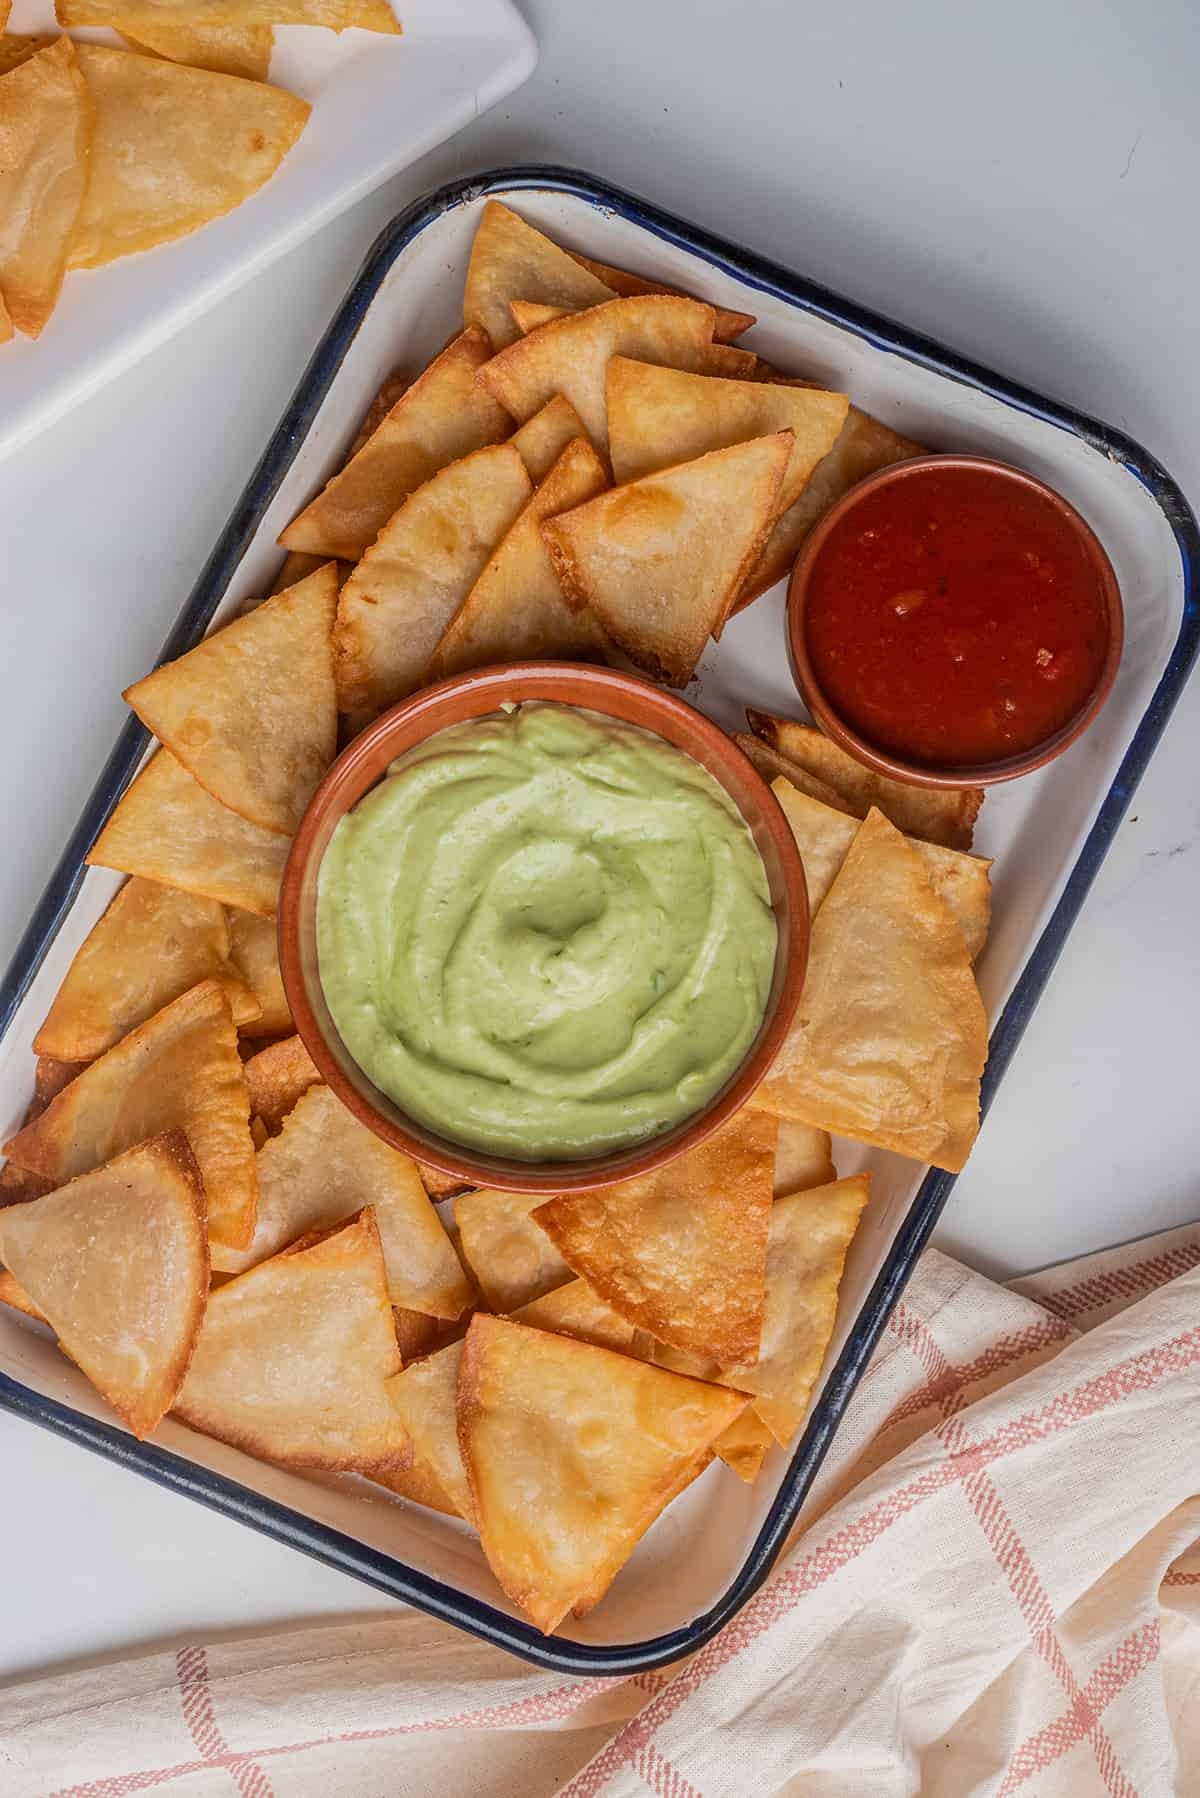 Mexican tortilla chips served with guacamole and salsa.